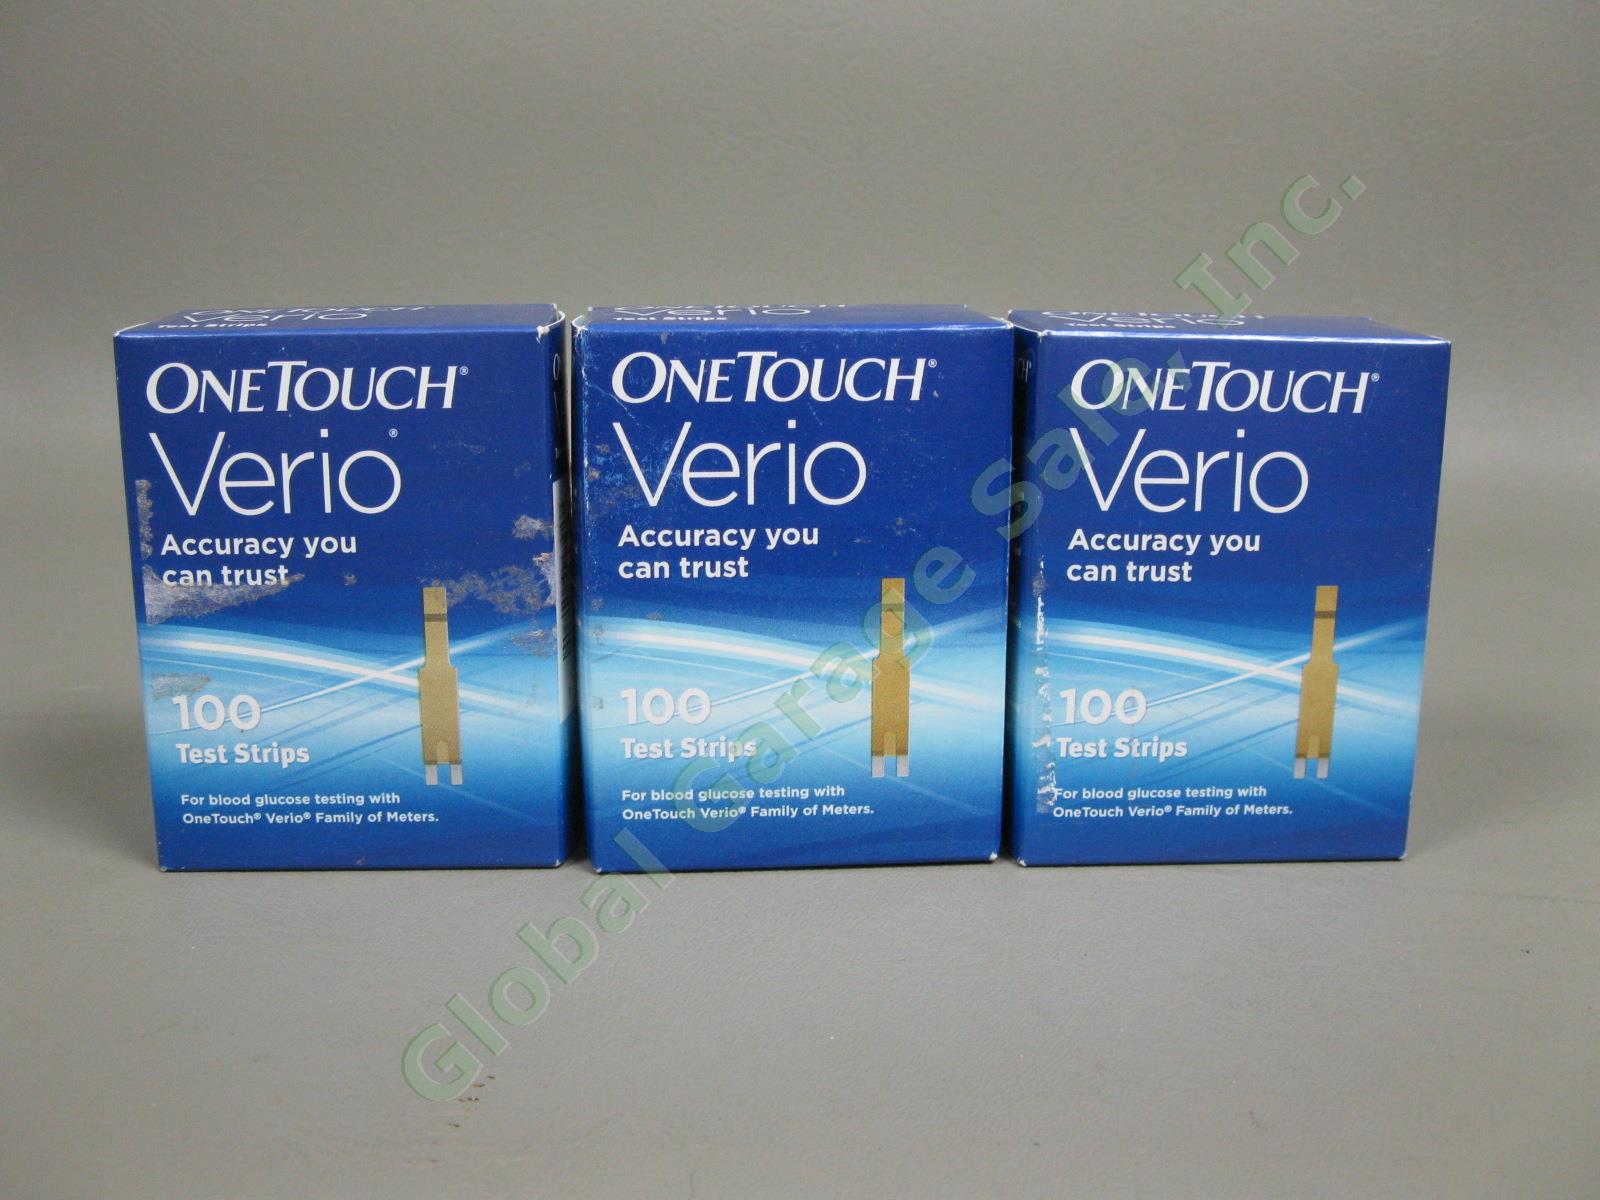 1100 NEW OneTouch Verio Diabetic Glucose Test Strips Sealed Lot Exp 2018-2019 NR 1